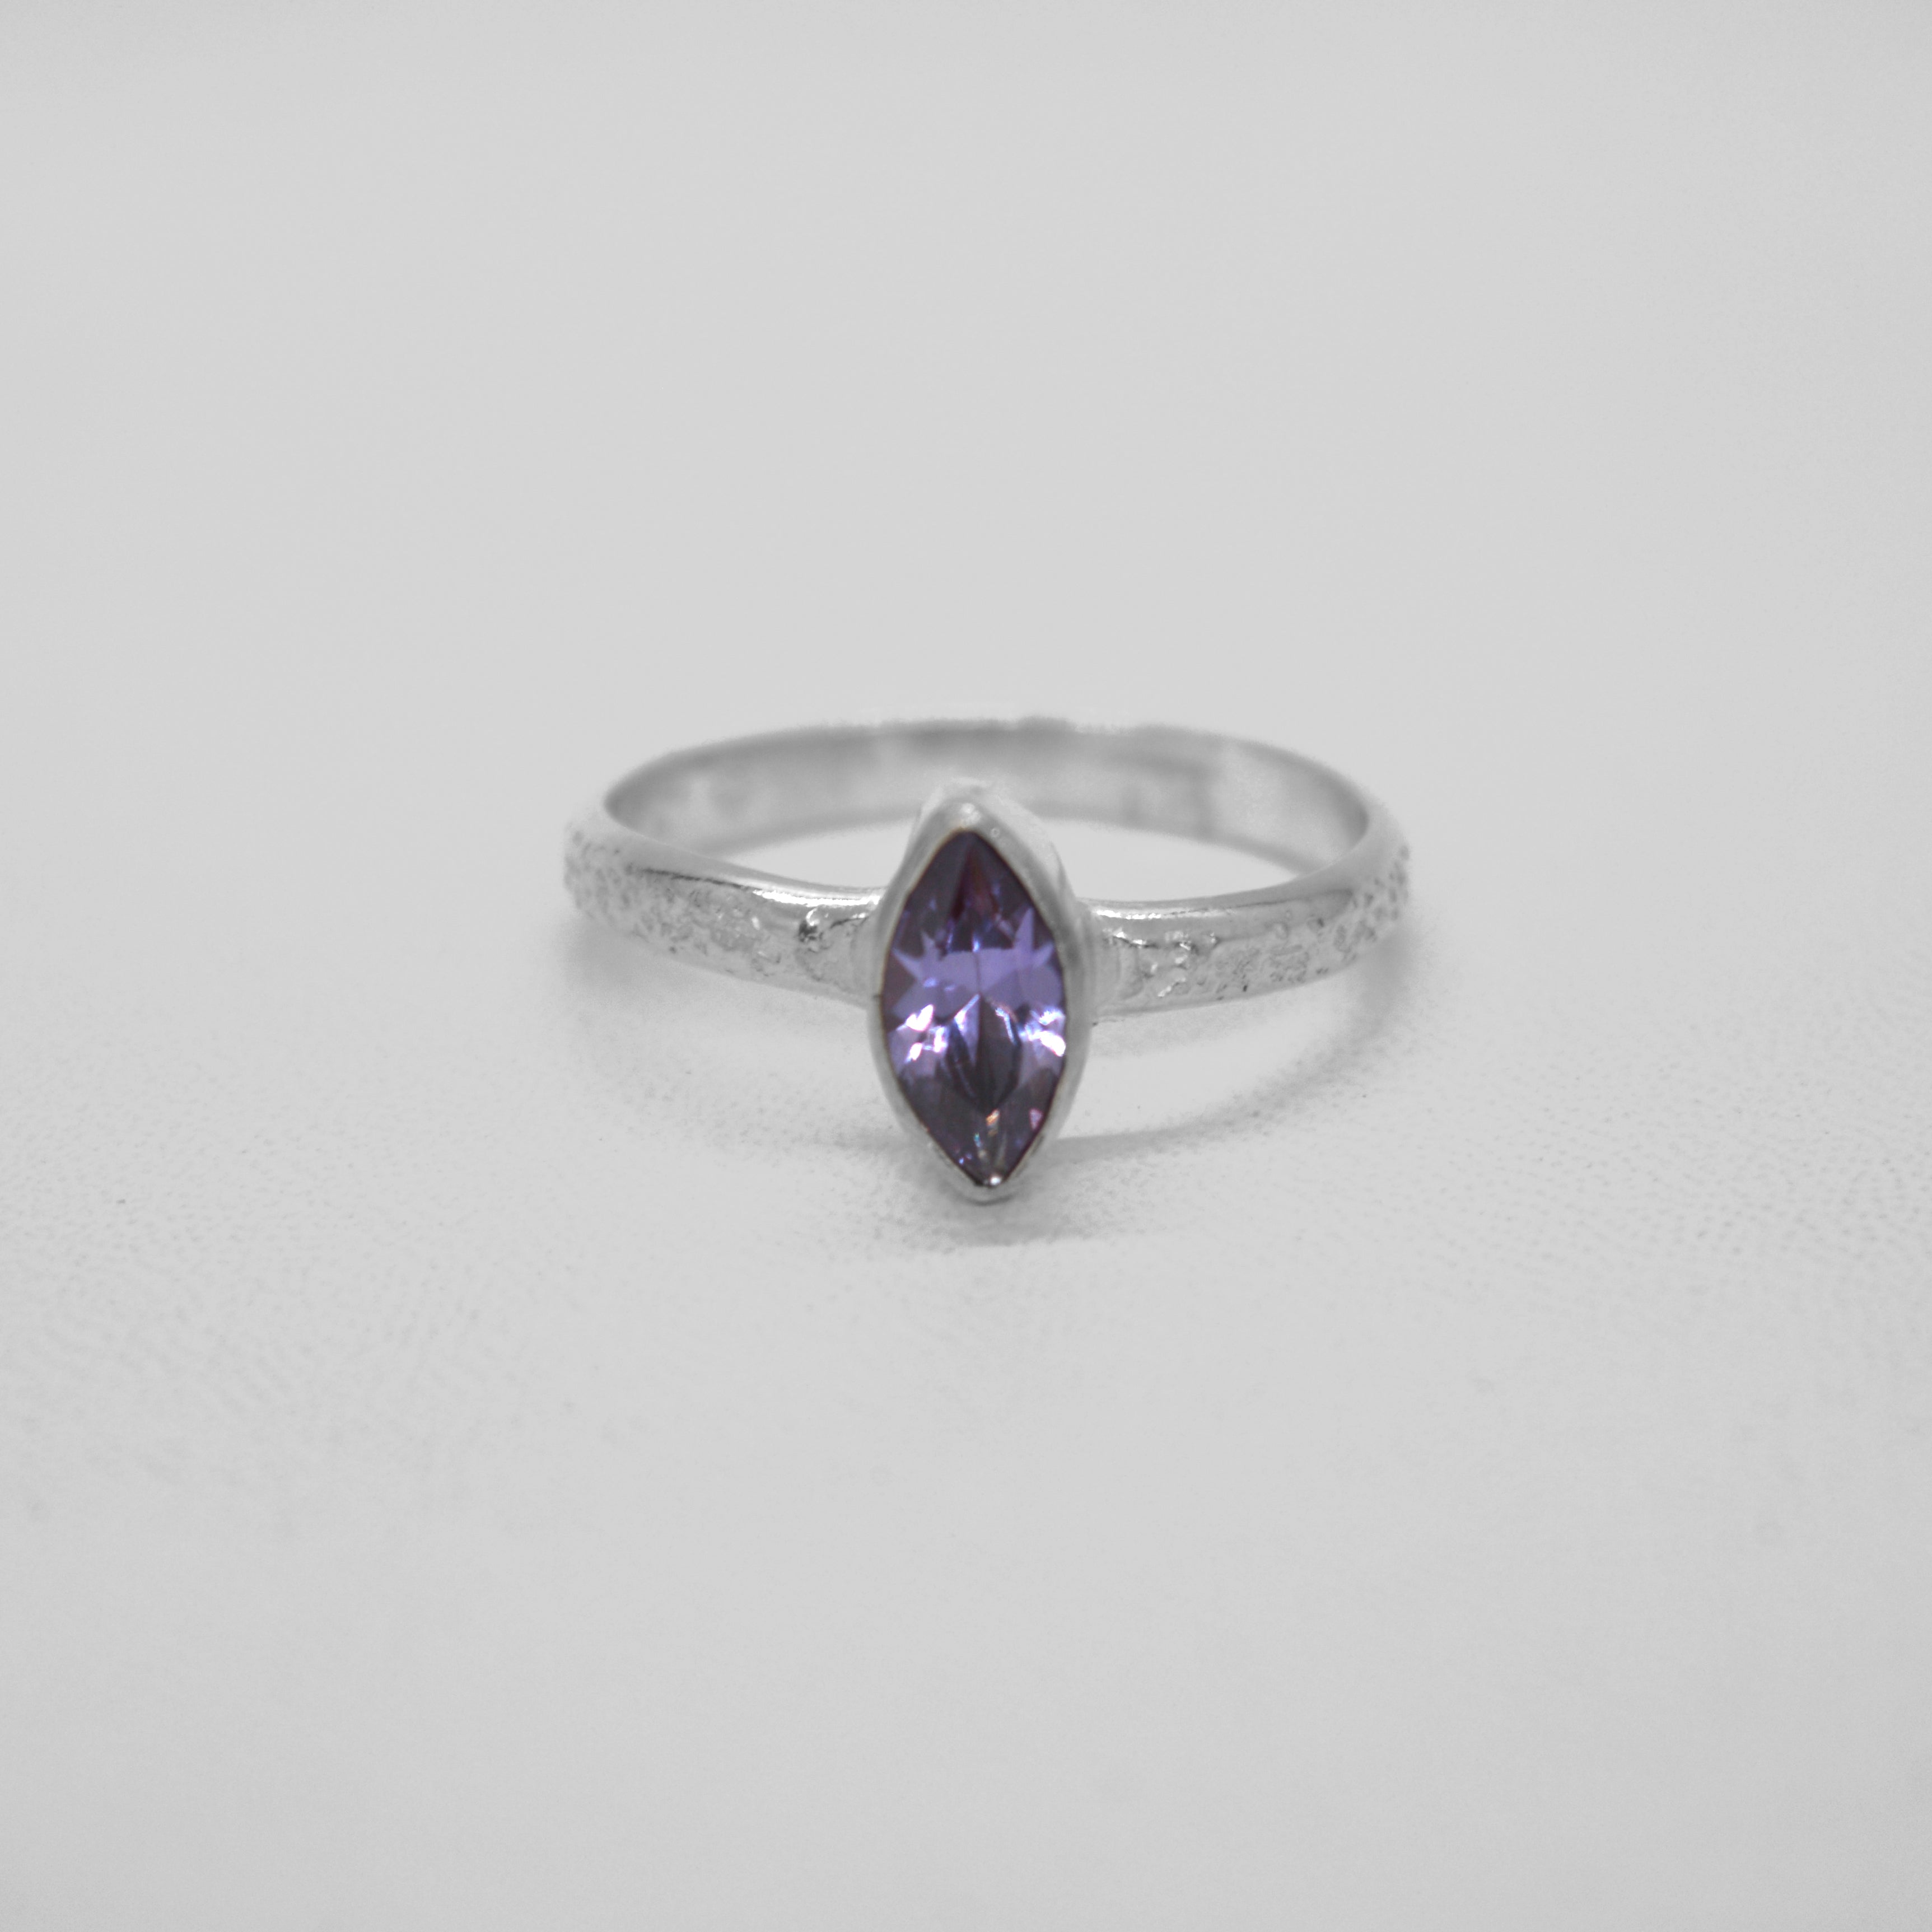 Marquis Sand Band Ring (Alexandrite Cubic Zirconia)